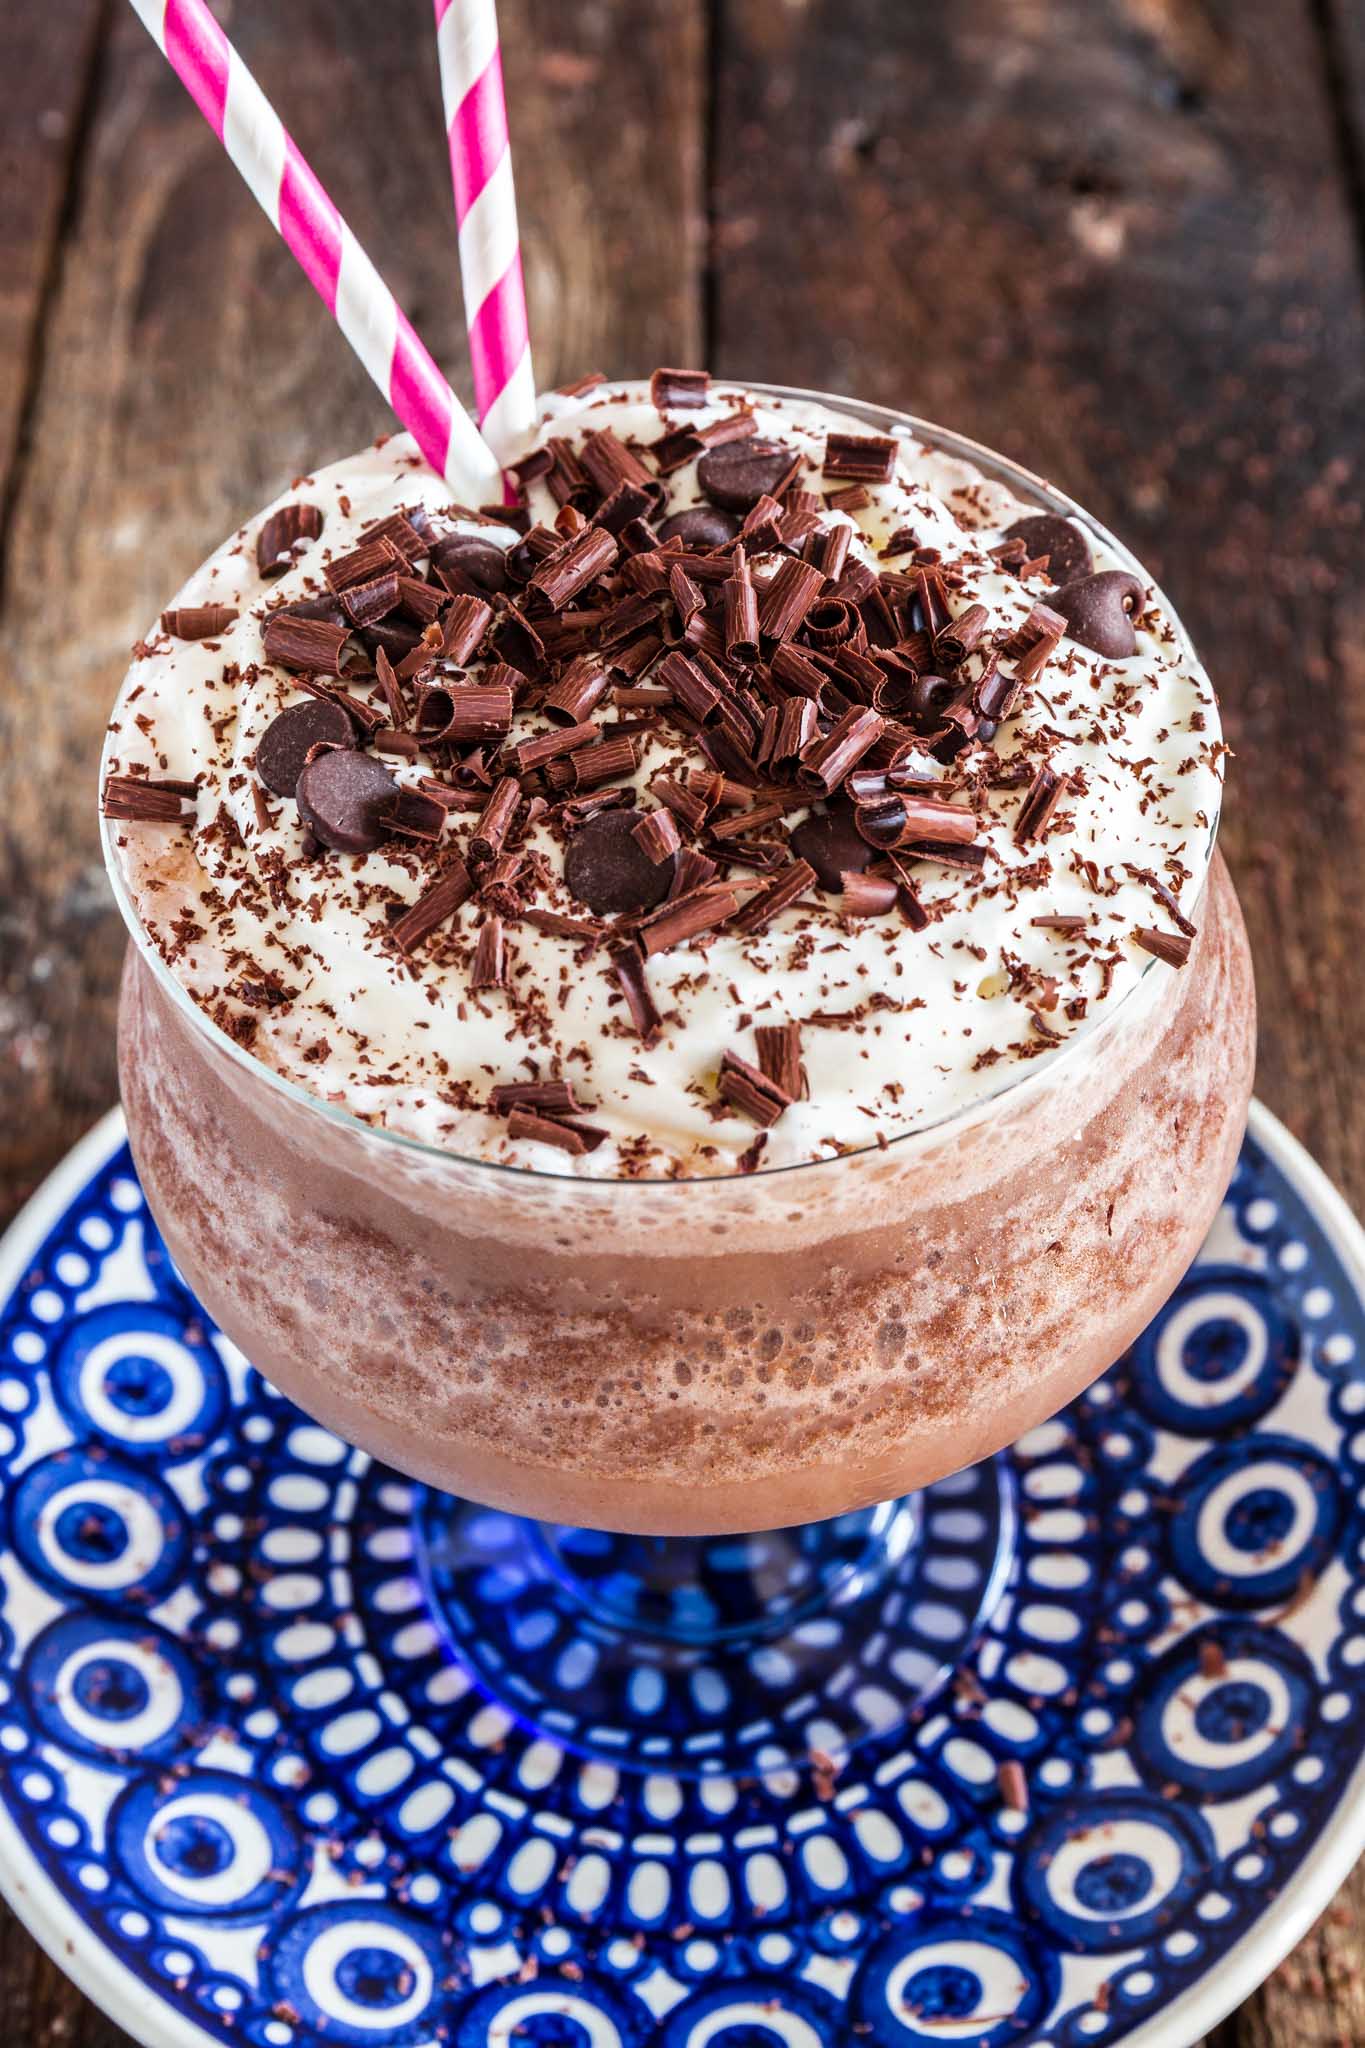 Frozen Hot Chocolate | www.oliviascuisine.com | Deliciously irresistible, this Frozen Hot Chocolate - inspired by the version served at Serendipity in NYC - is the ultimate summer treat! No wonder it makes Oprah want to "dance on the chandeliers". ??? (Recipe by @oliviascuisine.)